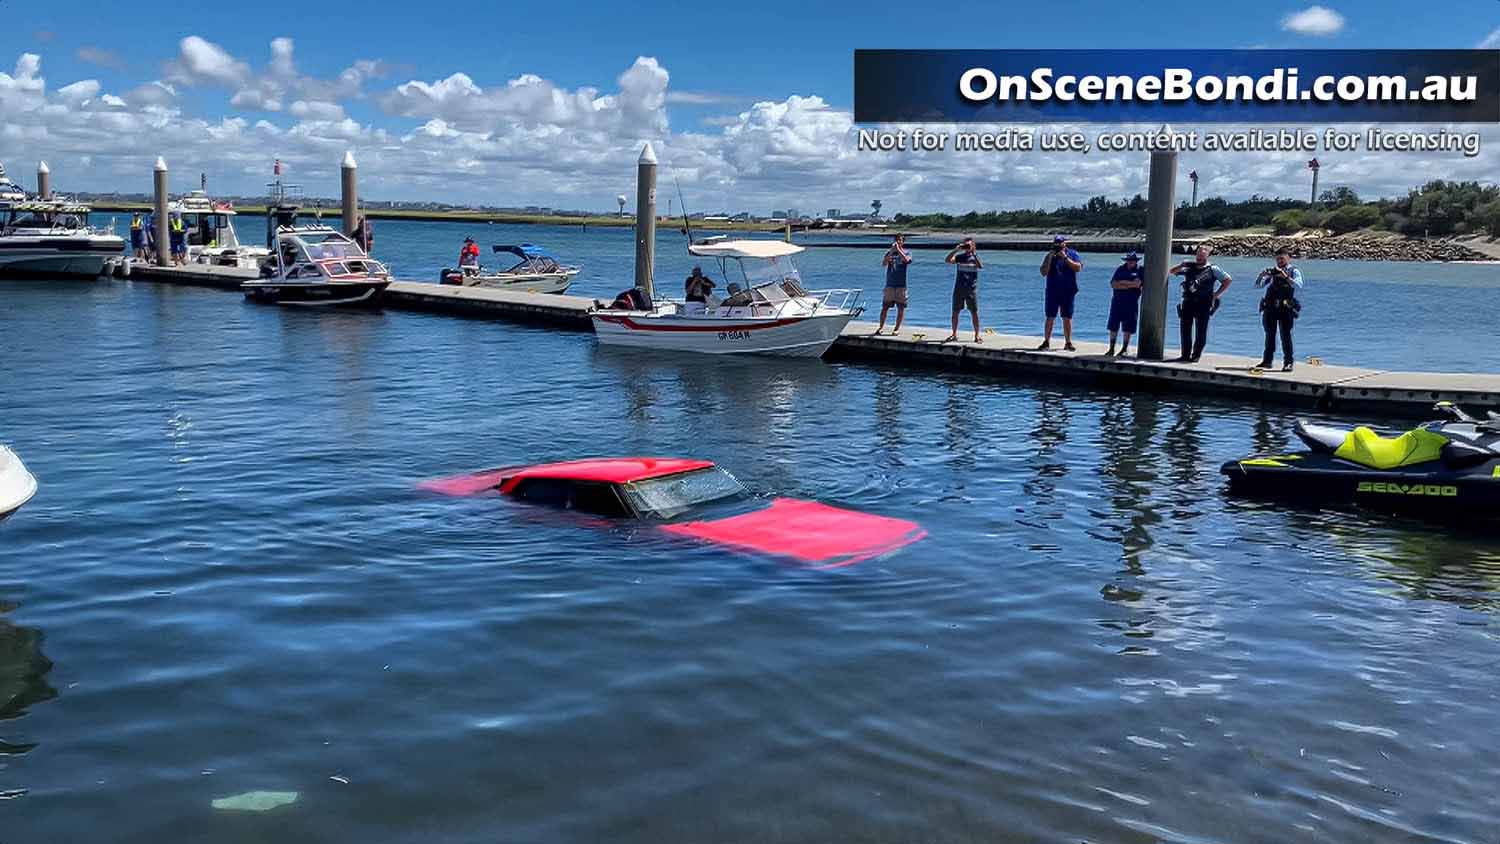 Car plunges underwater after losing traction at Botany Boat Ramp